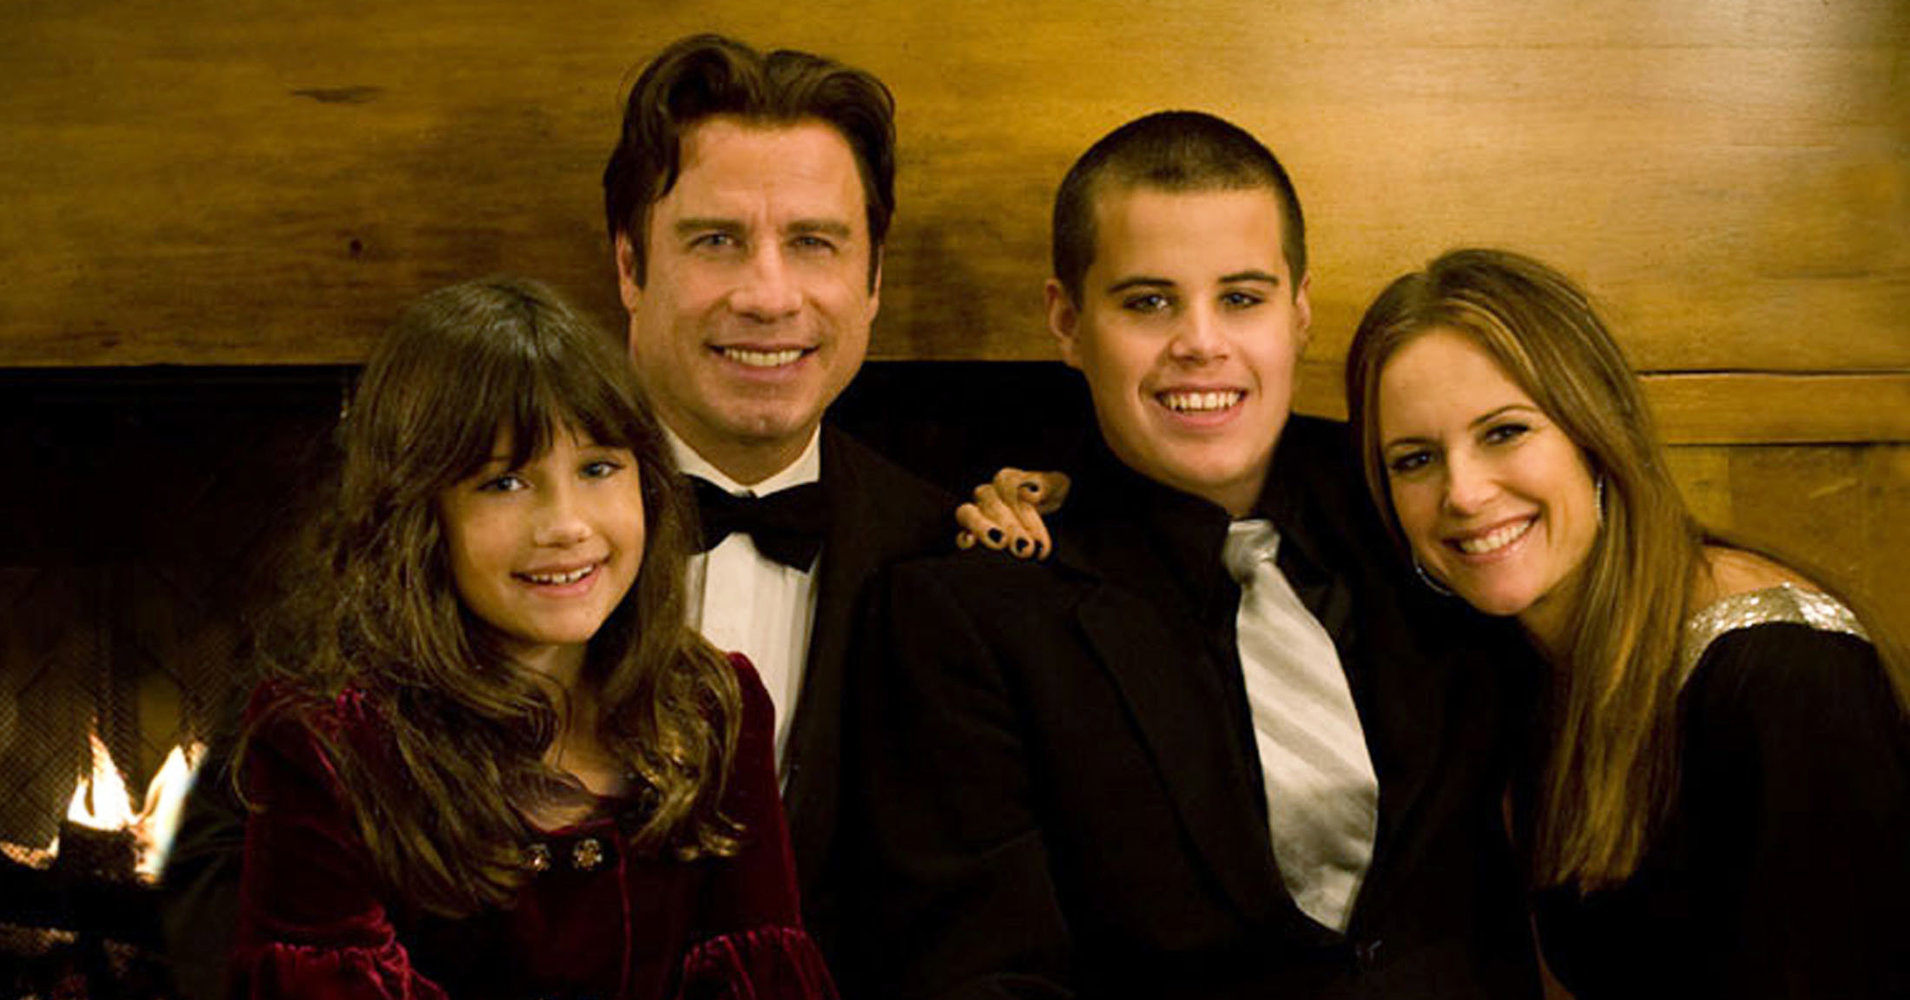 Members of the Travolta family are pictured in this undated photograph, released January 4, 2009. Actor John Travolta (2nd L) broke a two-day silence over the death of his 16-year-old son Jett (2nd R) on Sunday, saying he and his wife, actress Kelly Preston (R), were "heartbroken" by their sudden loss. Jett, who had a history of seizures, was found unconscious  in a bathroom at his family's home at the Old Bahama Bay resort on Grand Bahama Island on Friday morning. Daughter Ella is pictured at left. REUTERS/Courtesy of the Travolta family/Rogers &amp; Cowan/Handout (UNITED STATES)    MANDATORY CREDIT.  FOR EDITORIAL USE ONLY. NOT FOR SALE FOR MARKETING OR ADVERTISING CAMPAIGNS.